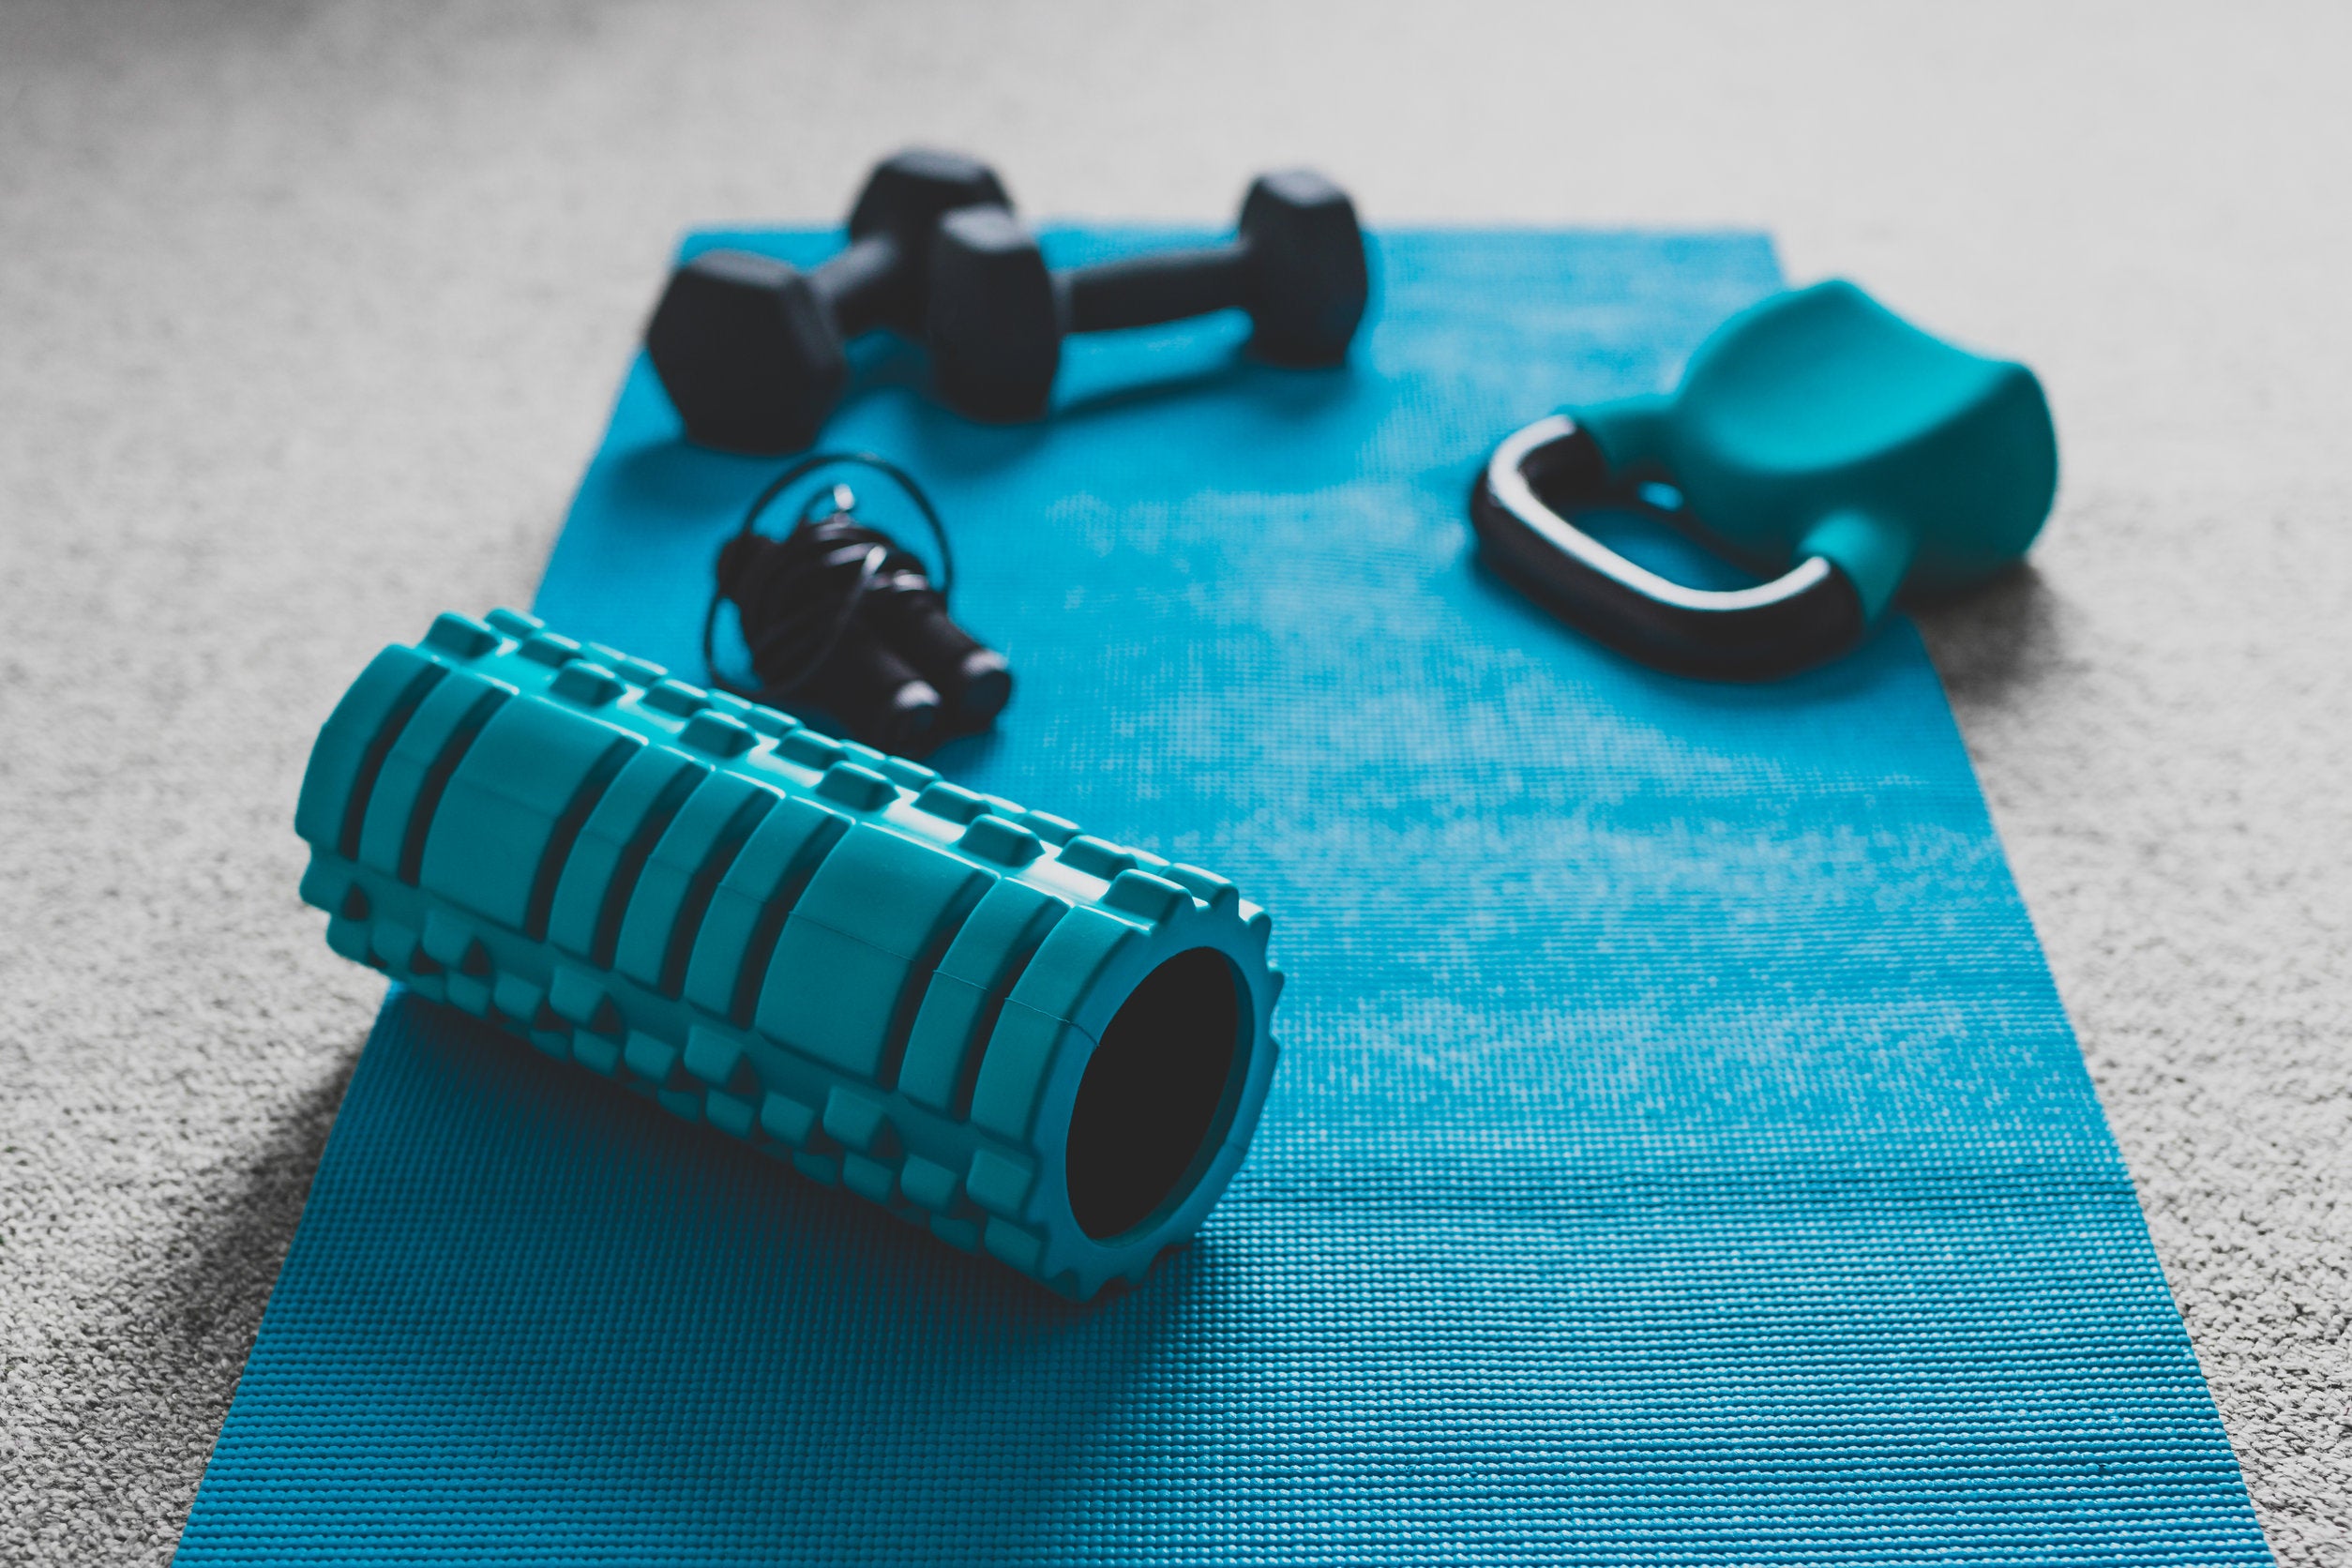 Use A Foam Roller to Get Rid of Sore Muscles And Speed Up Your Workout Recovery